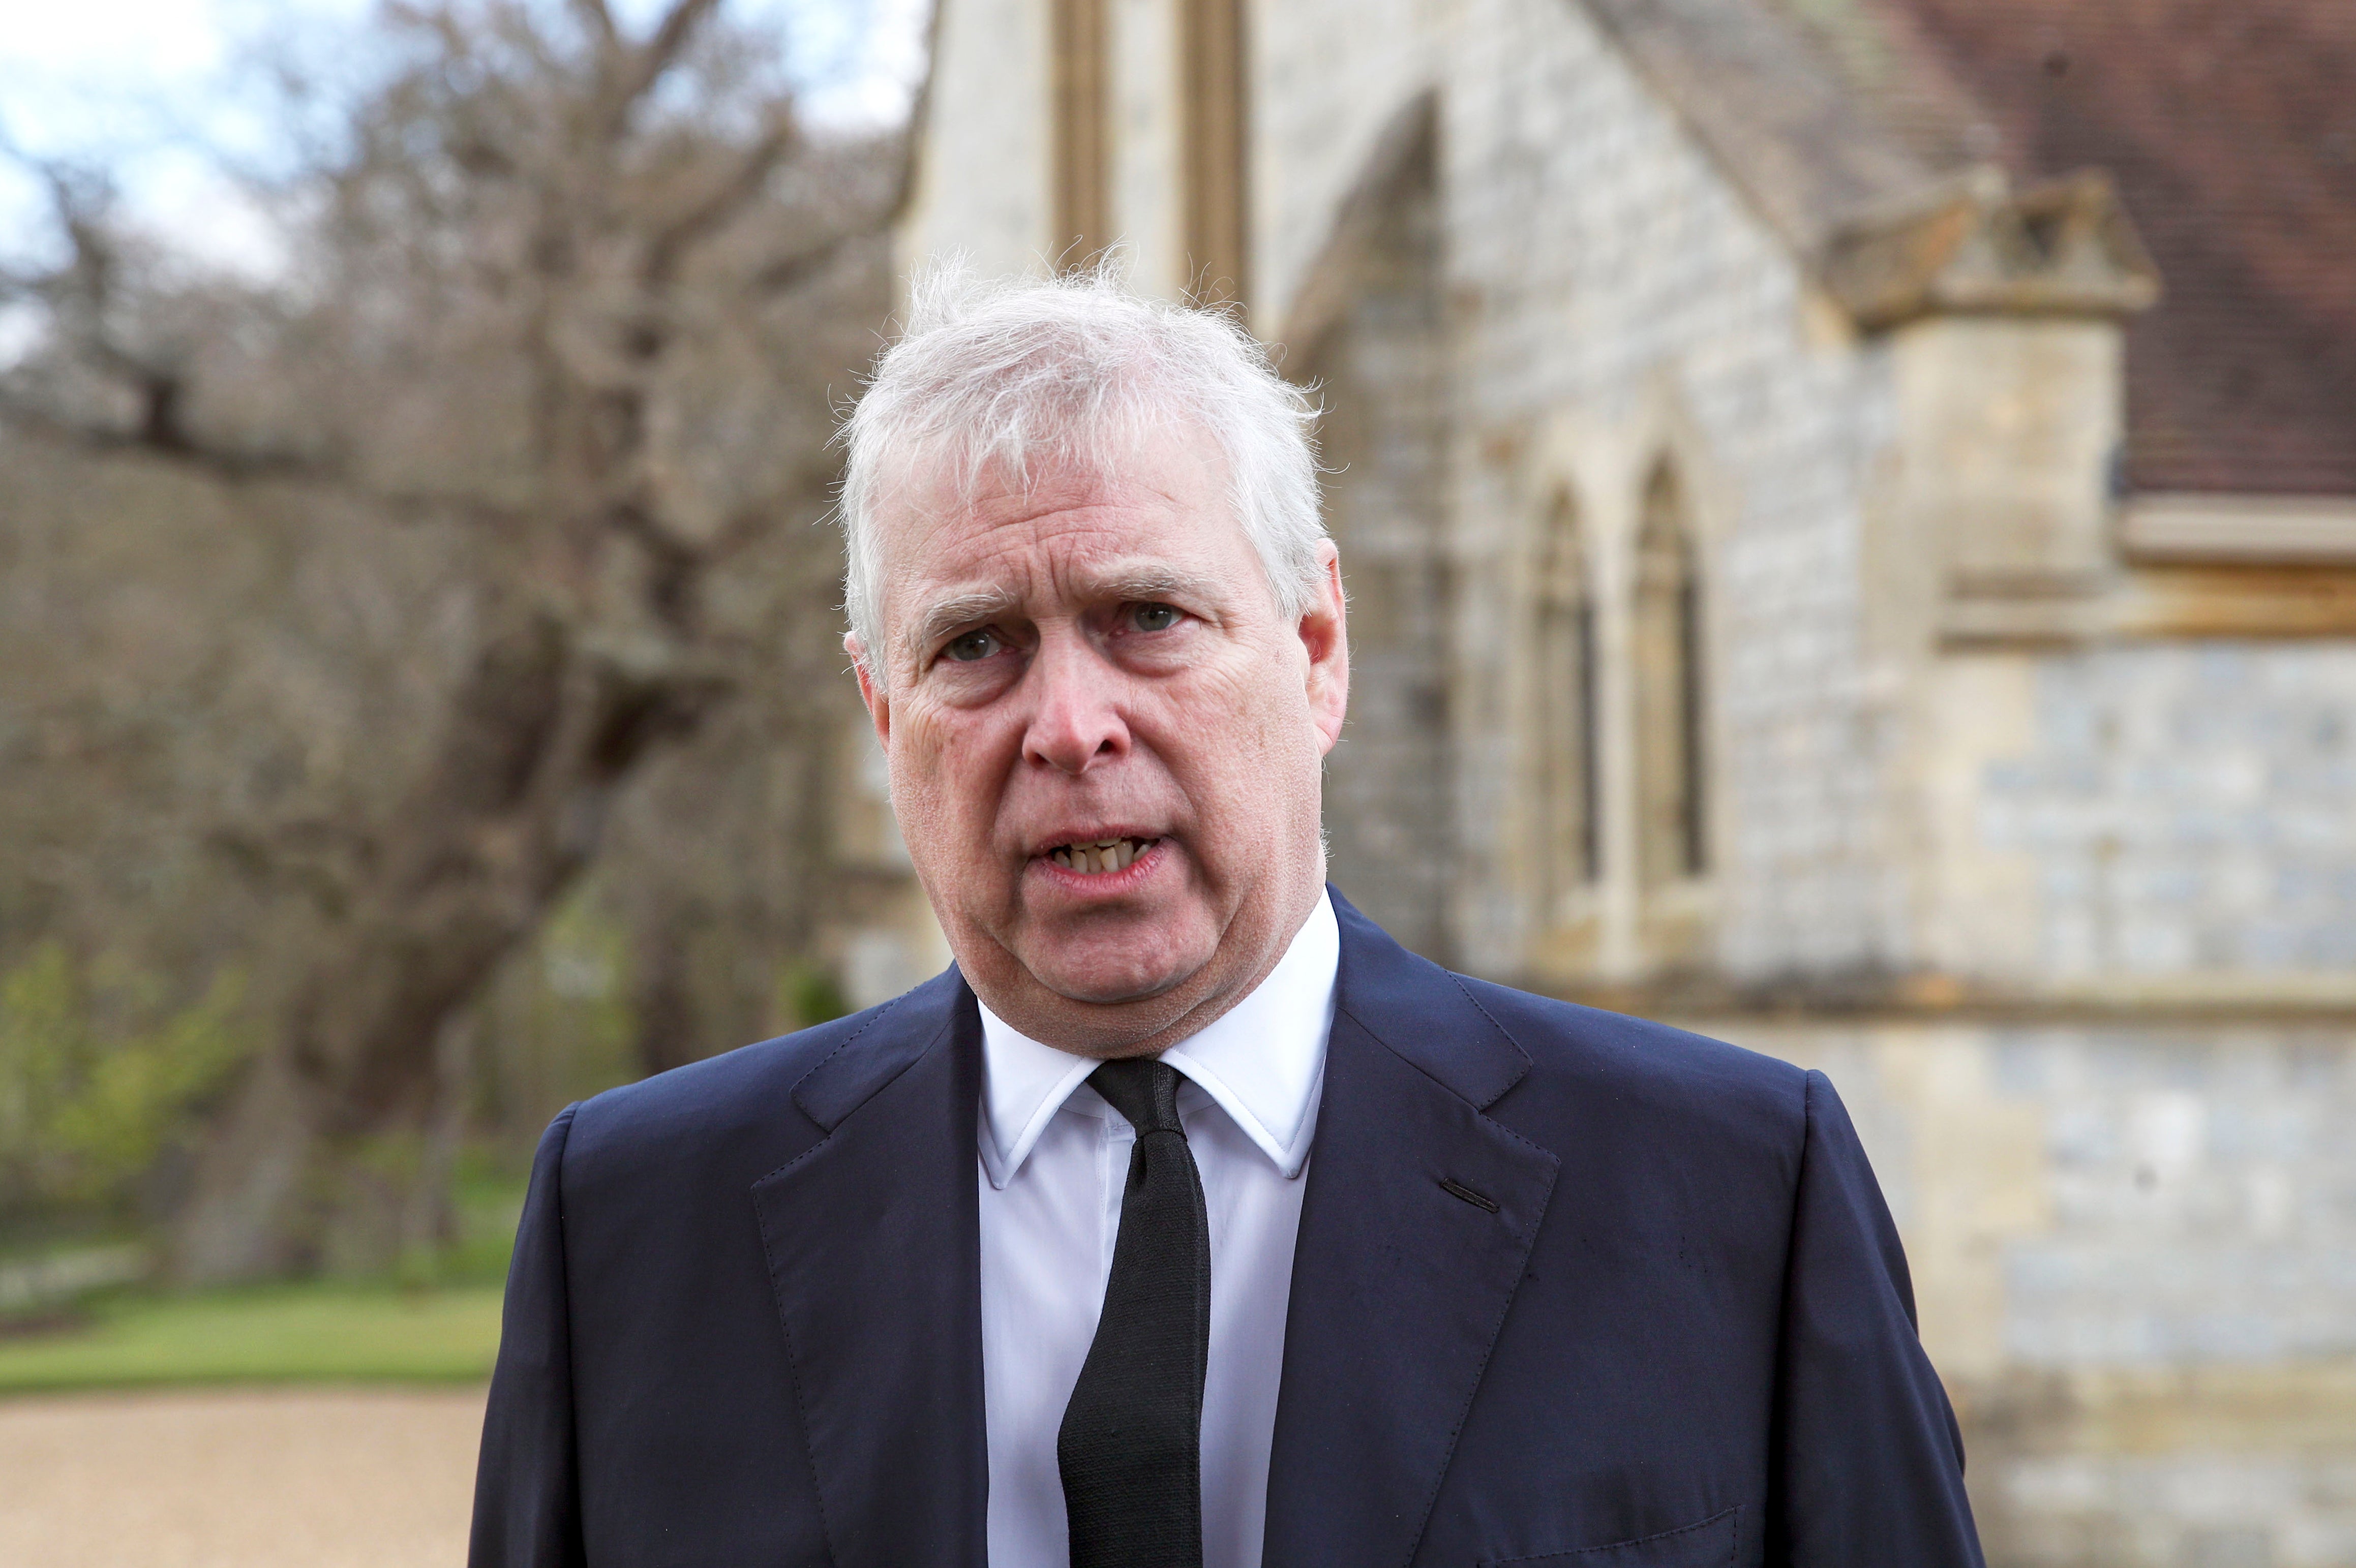 Prince Andrew has been served with a lawsuit filed by an American woman who accuses him of having sex with her when she was underage